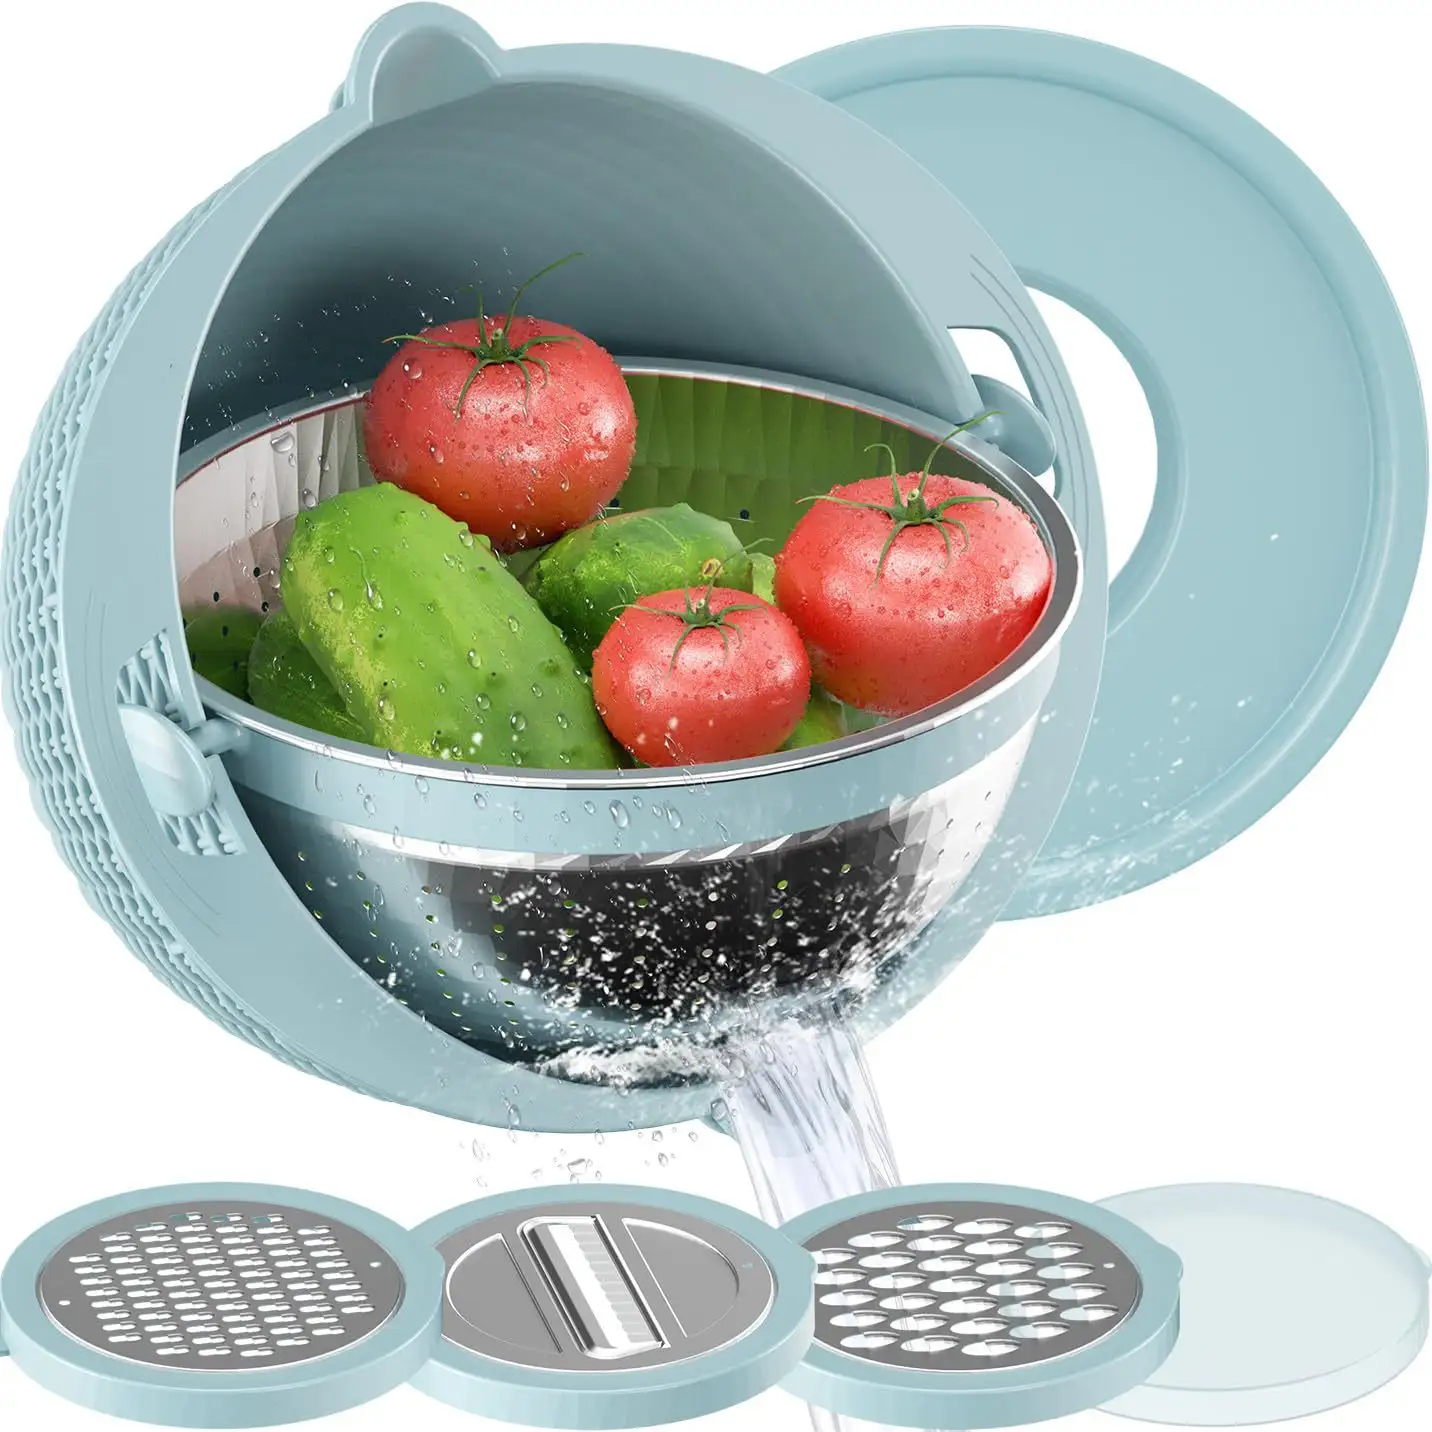 Multifunctional Drain Basket Stainless Steel Colander With Plastic Mixing Bowl Food Strainer